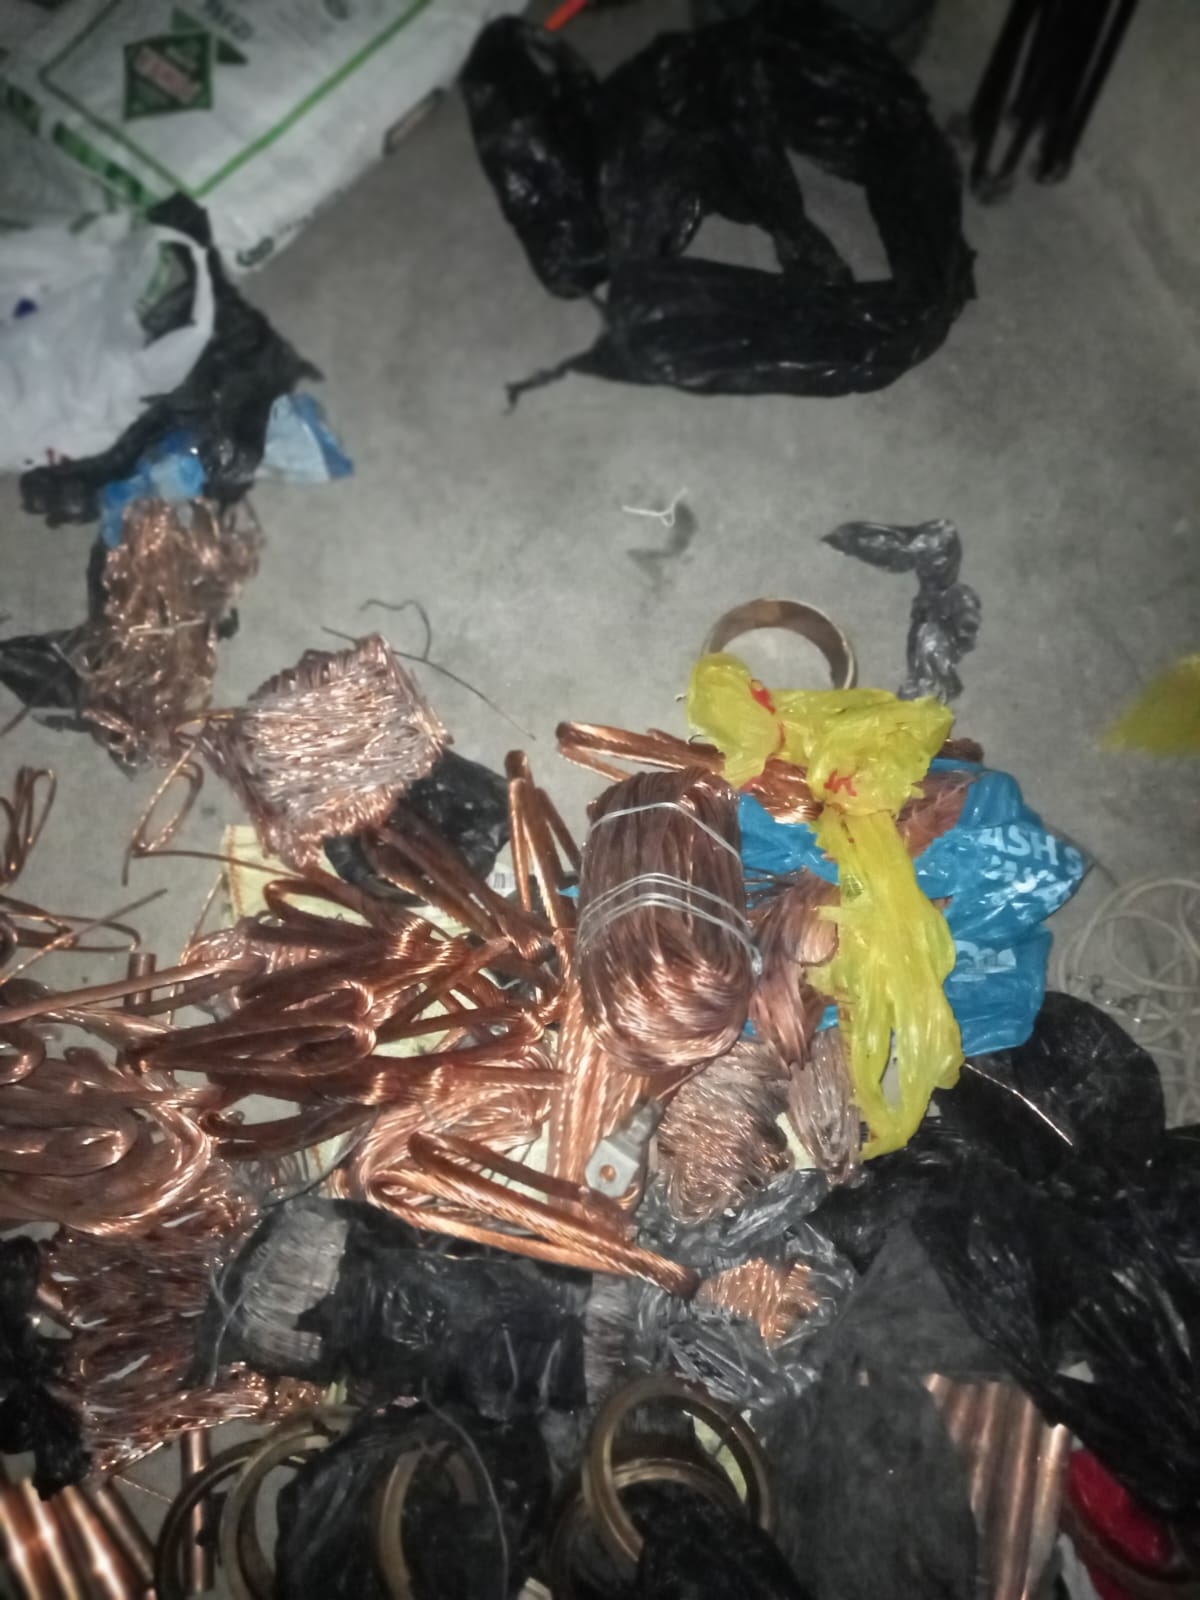 Police arrest duo for suspected stolen copper cables, damaging and tampering with essential infrastructure